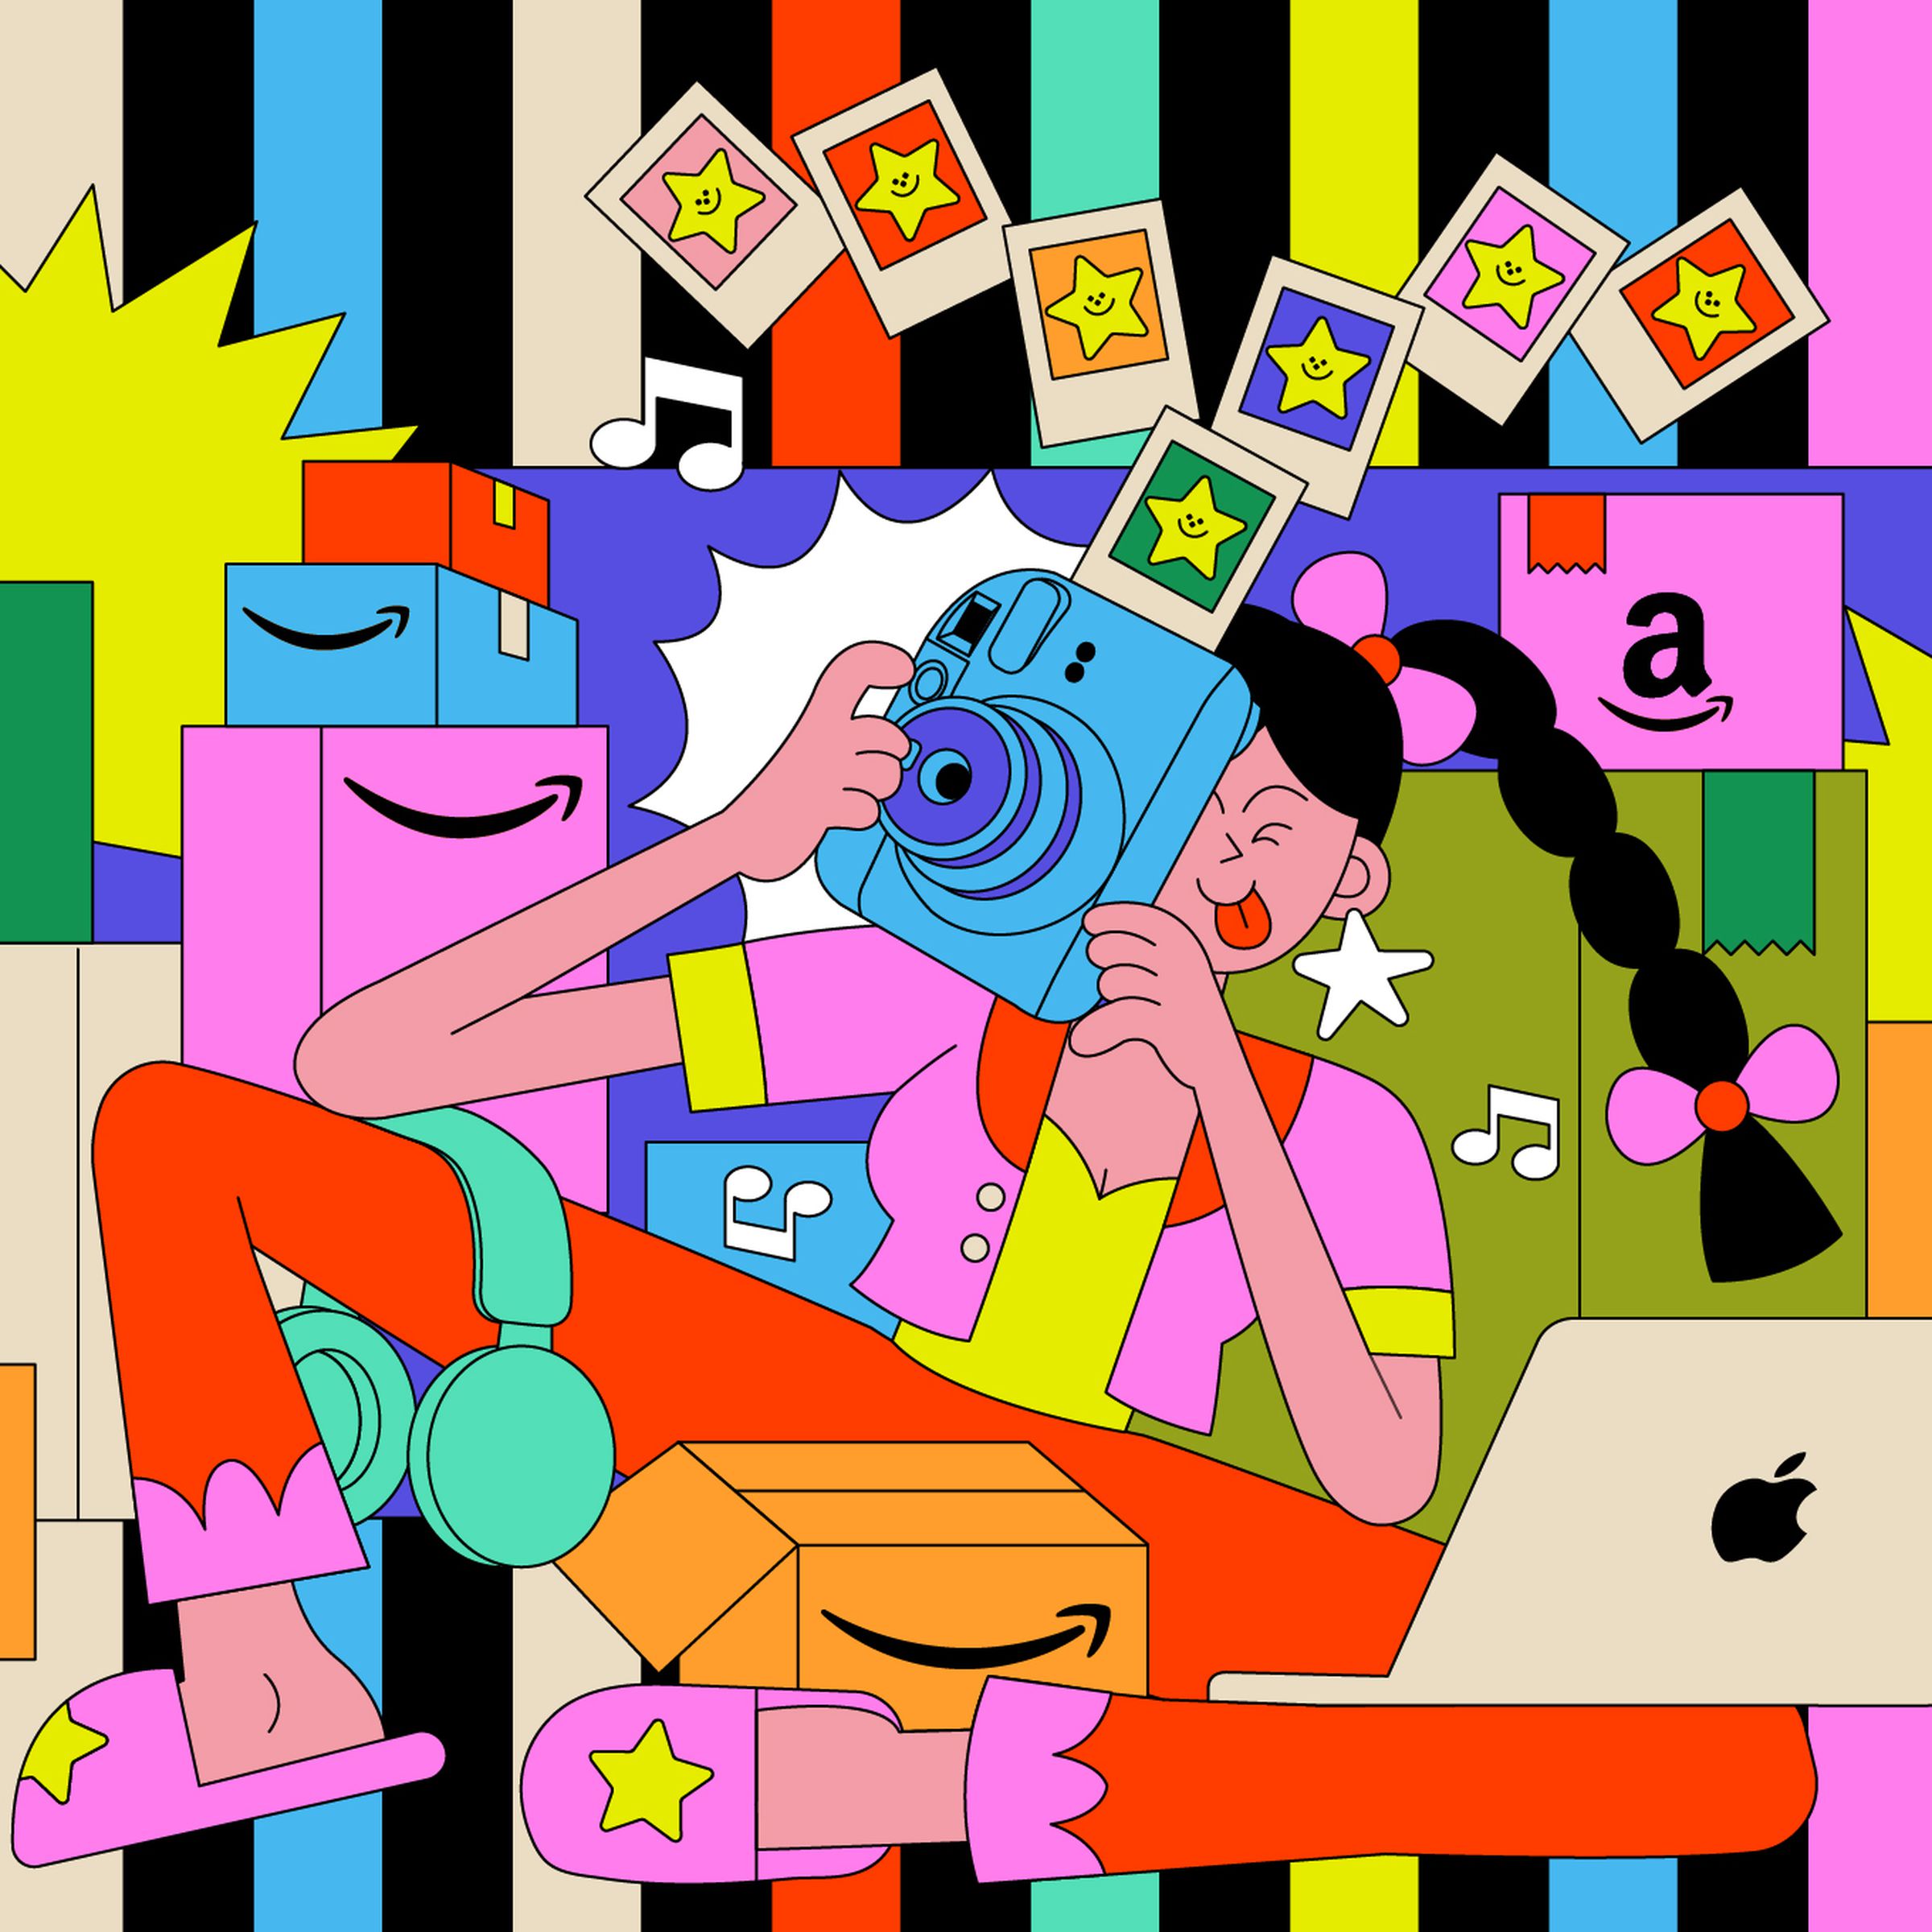 Colorful illustration of a girl taking photos with a new camera. She is surrounded by Amazon packages.